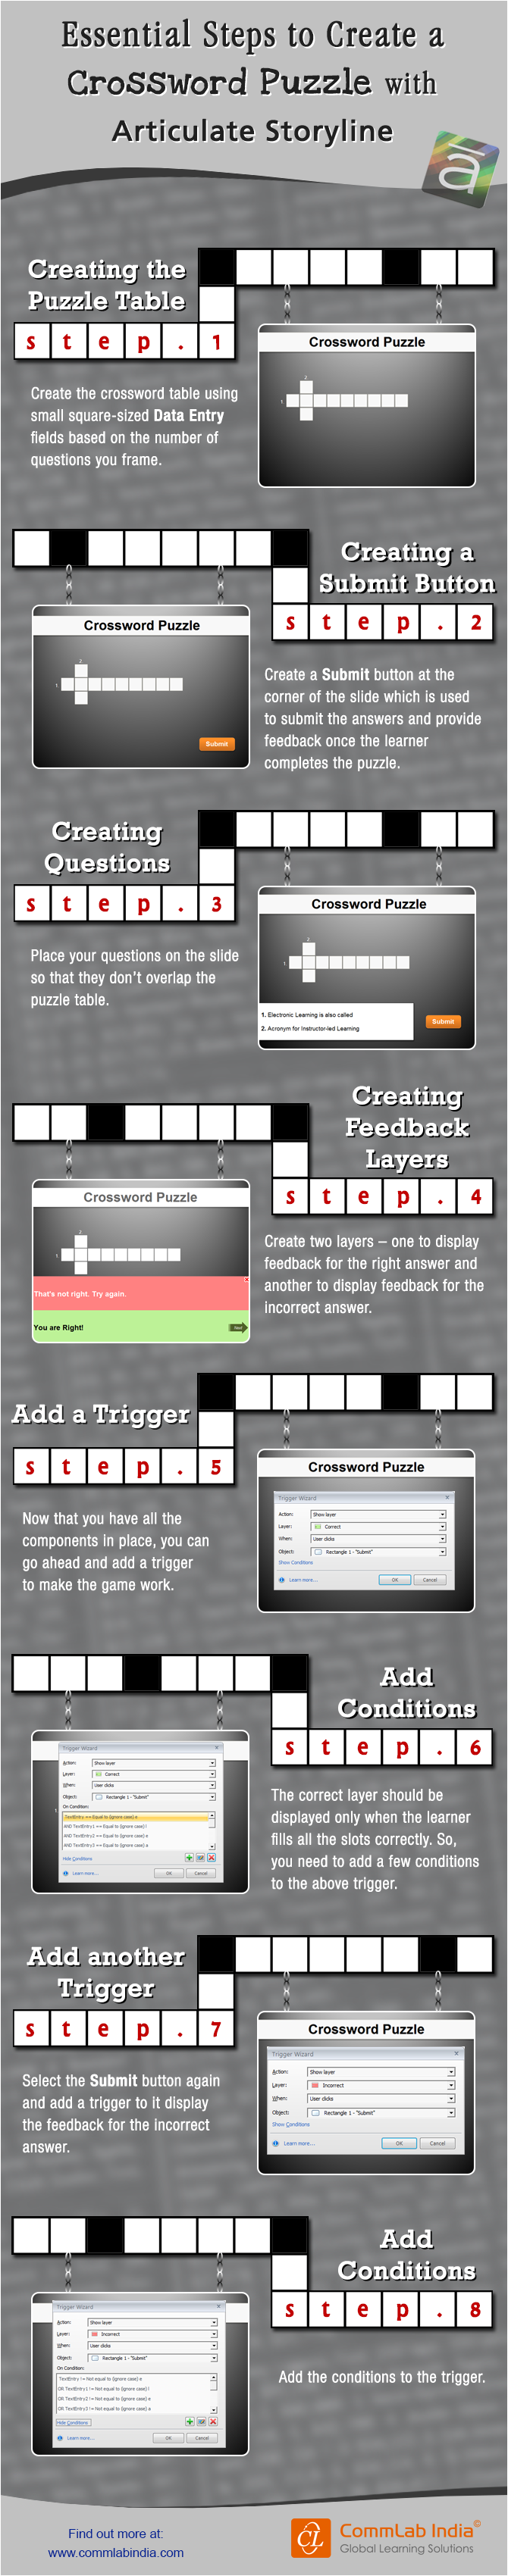 Steps to Create a Crossword Puzzle in Articulate Storyline [Infographic]